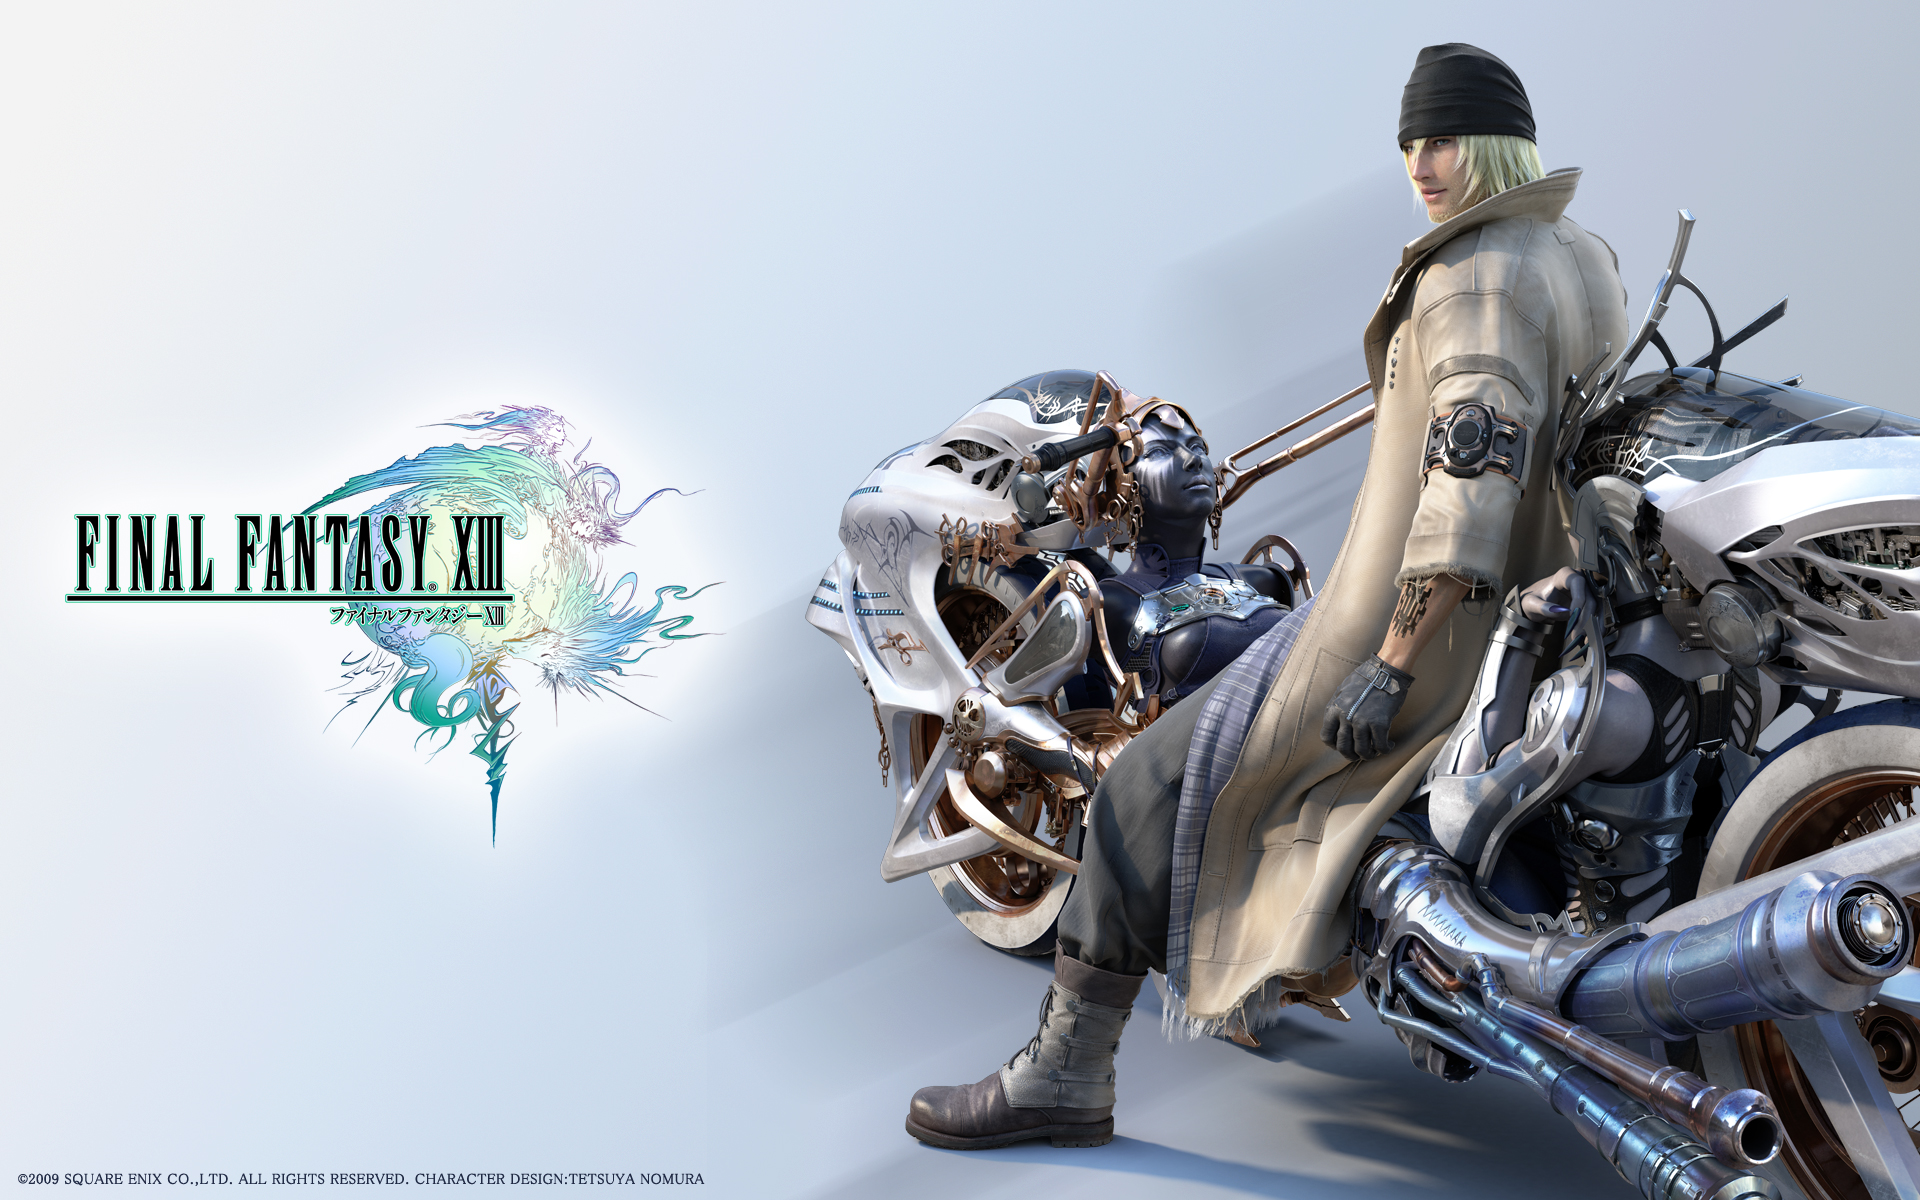  our wallpaper of the week Final Fantasy Final Fantasy wallpapers